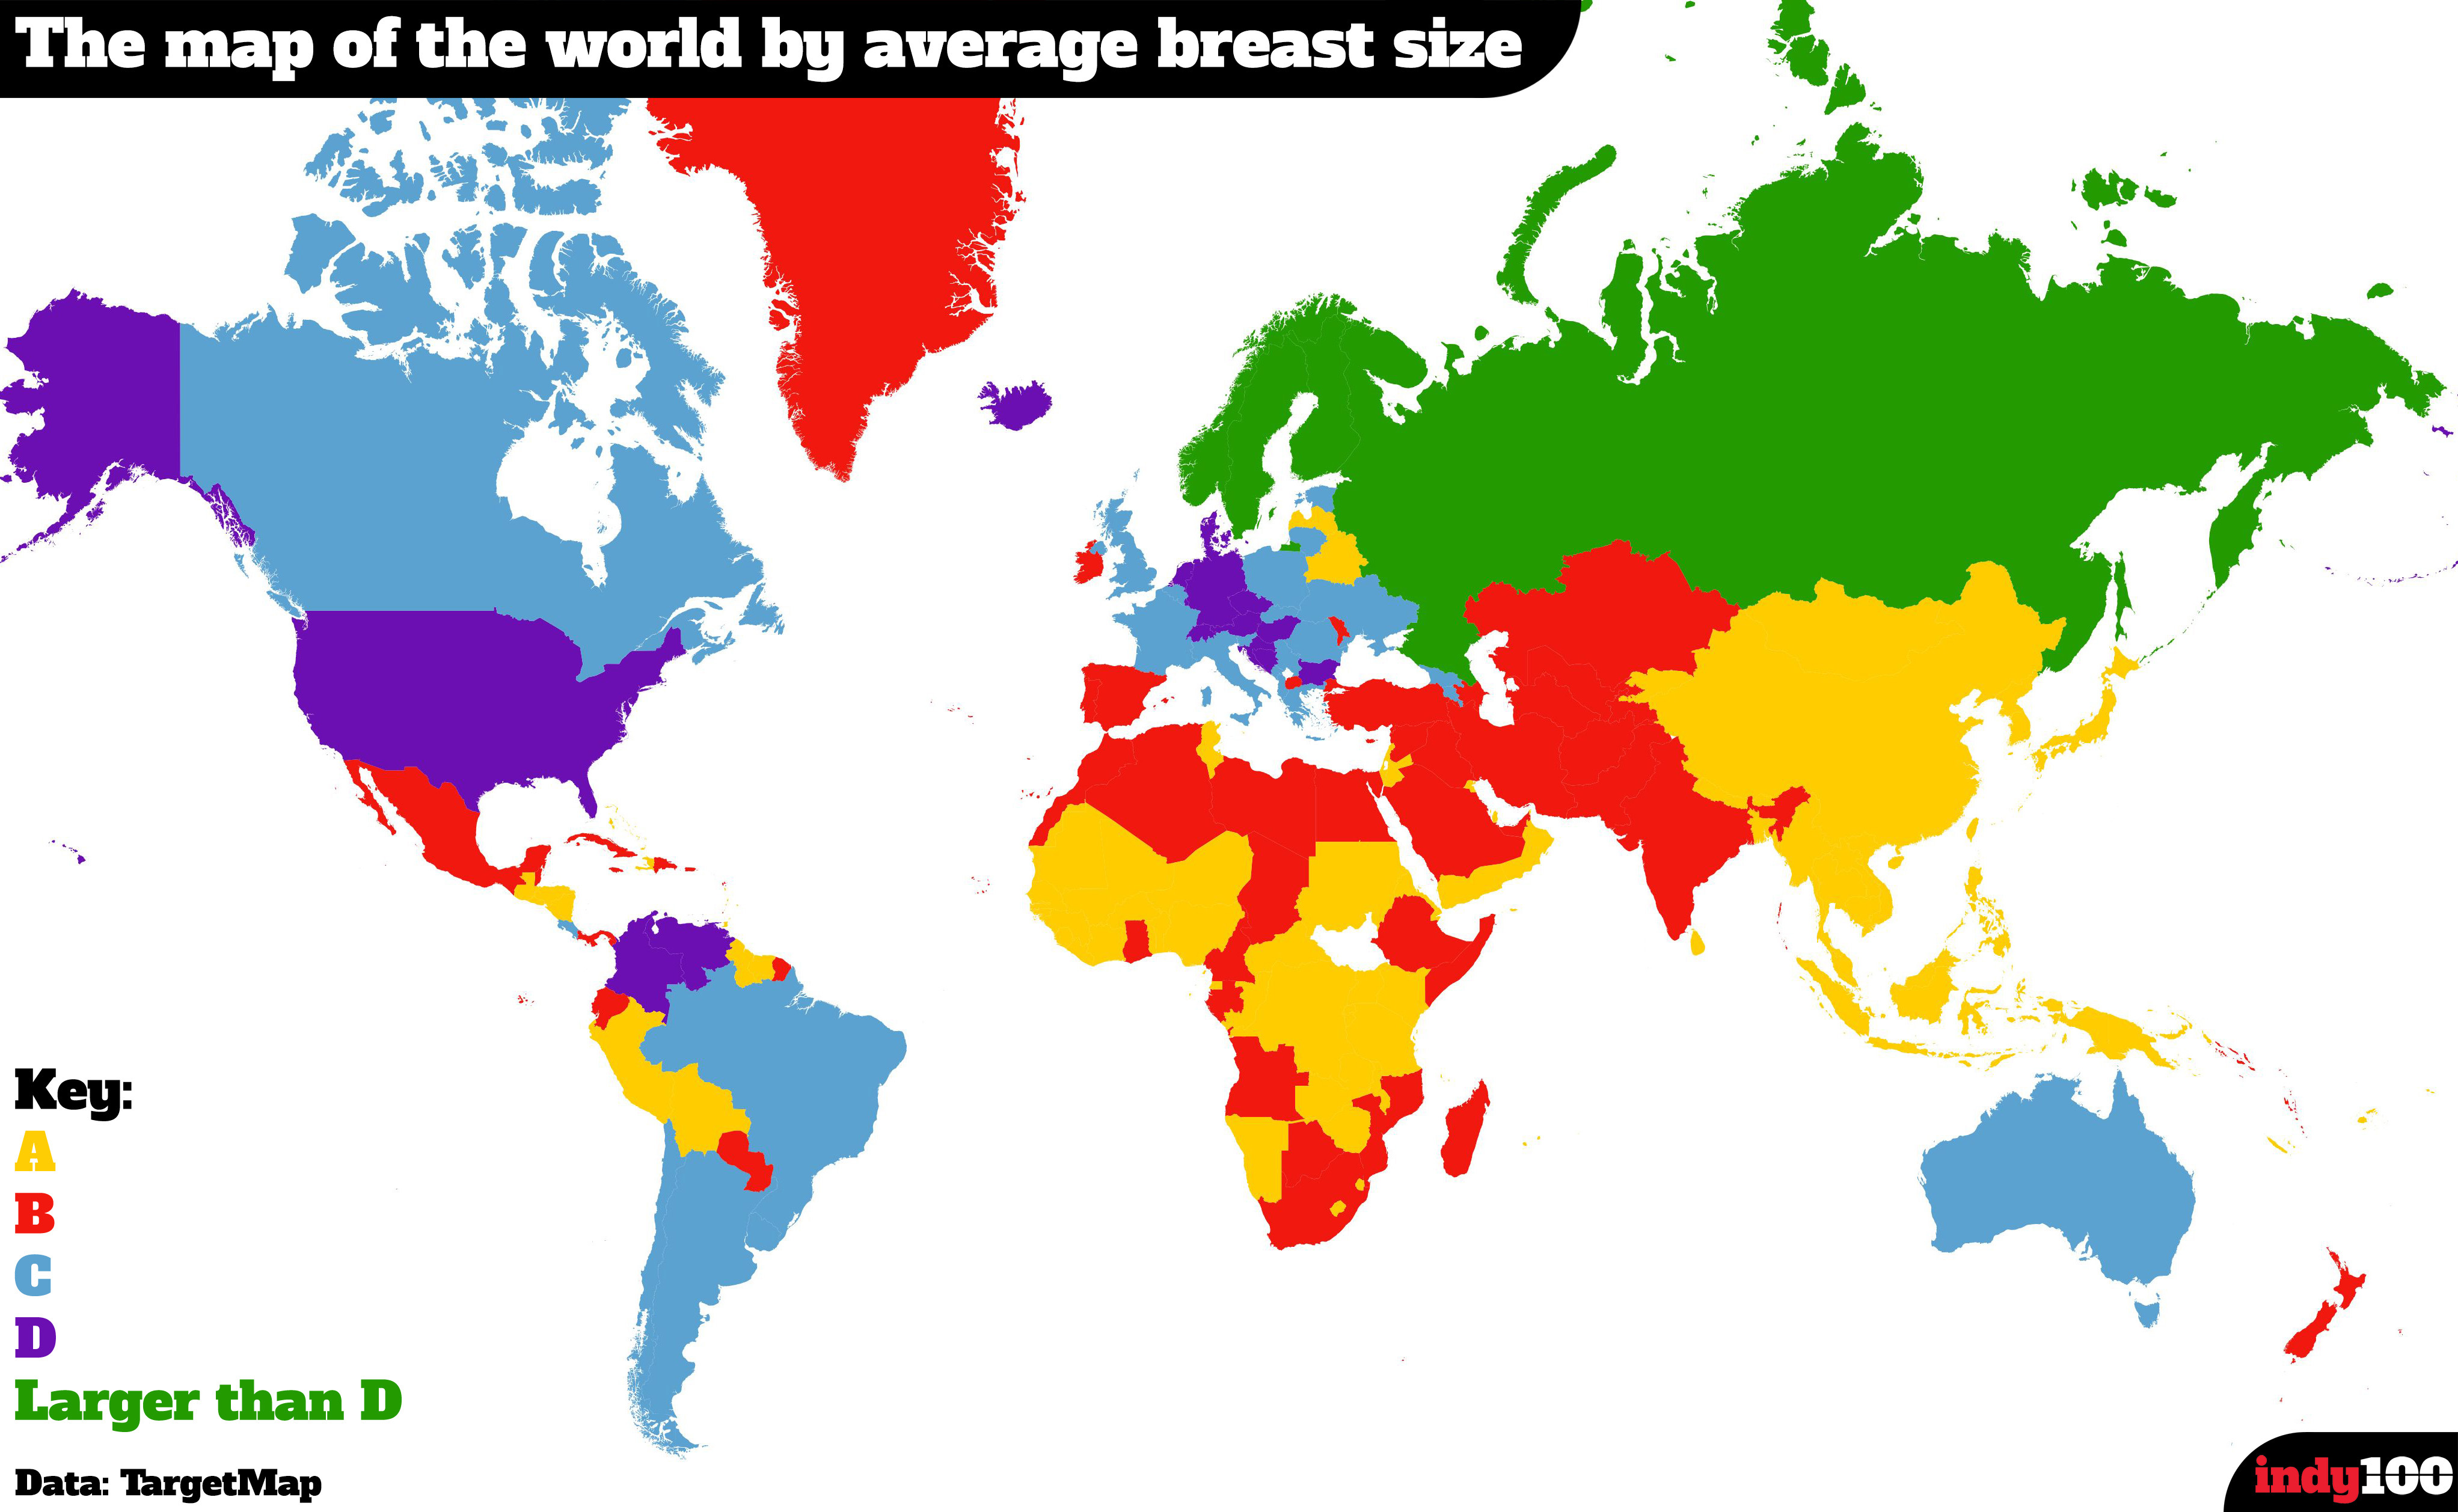 Whats the average bra size of a 14-15 yearold?